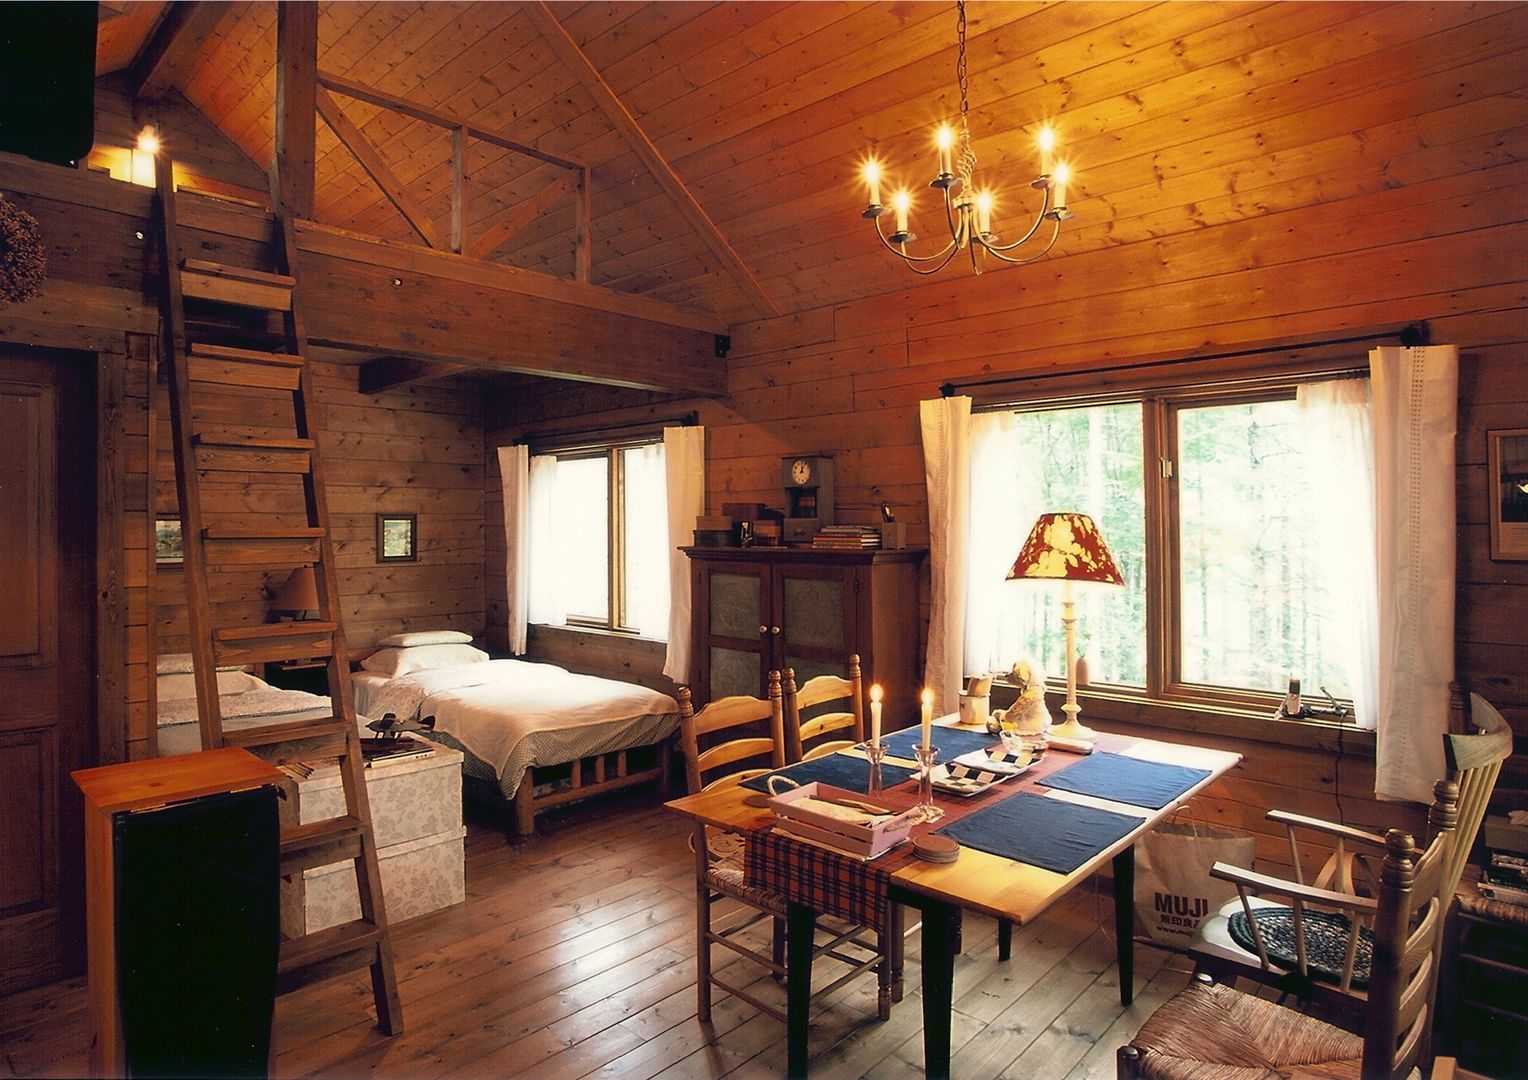 Small Cottage at Mt.Yatsugatake, Japan, Cottage Style / コテージスタイル Cottage Style / コテージスタイル Σαλόνι